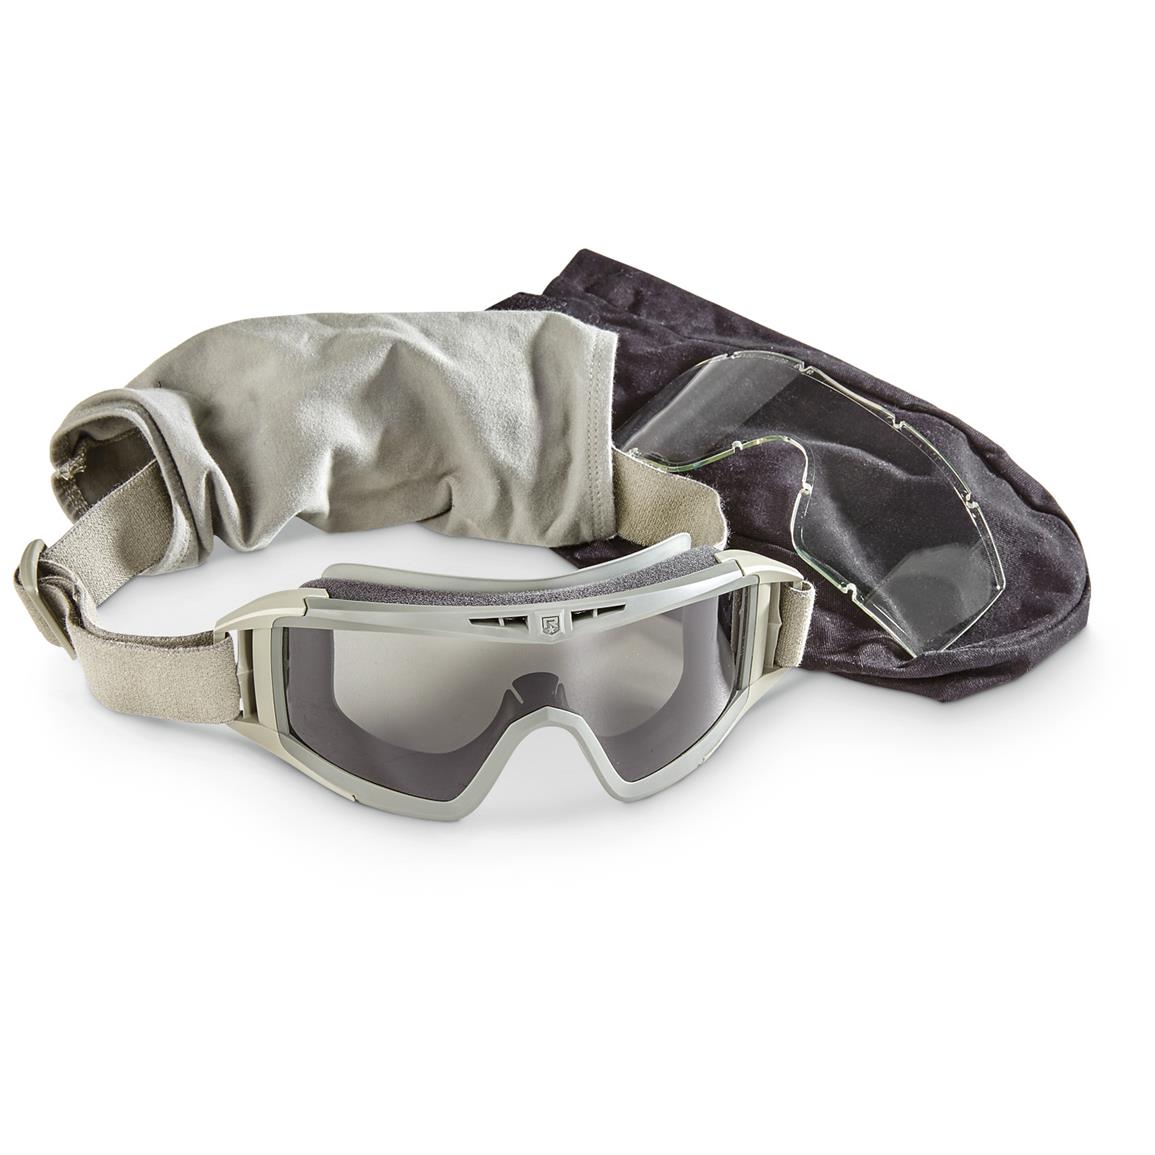 U S Military Issue Tactical Goggles New 660858 Goggles And Eyewear At Sportsman S Guide